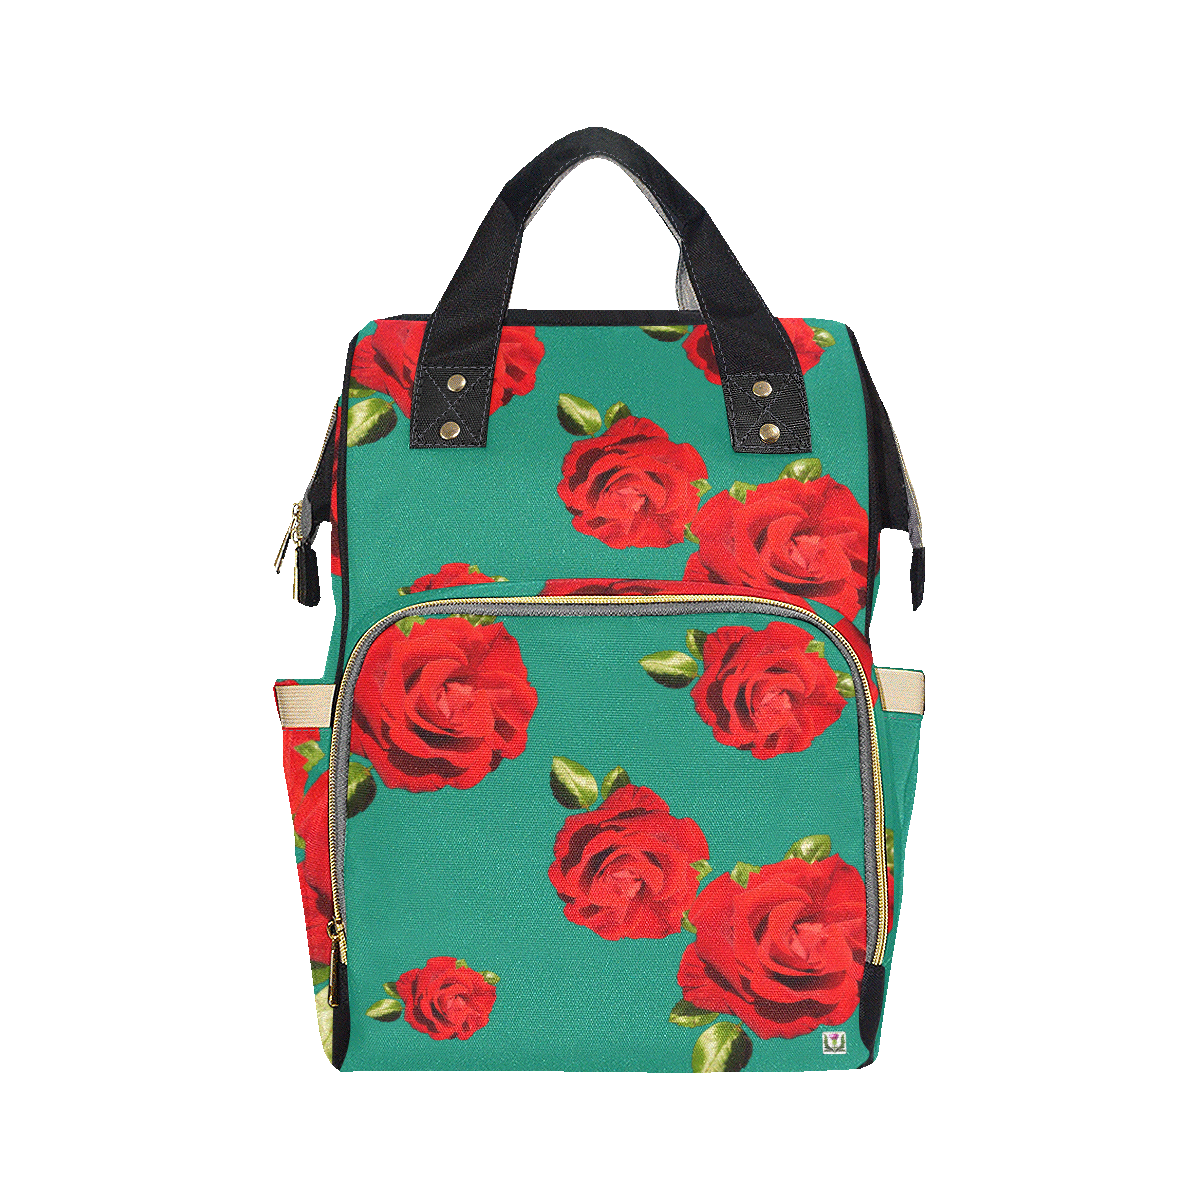 Fairlings Delight's Floral Luxury Collection- Red Rose Multi-Function Diaper Backpack 53086c17 Multi-Function Diaper Backpack/Diaper Bag (Model 1688)